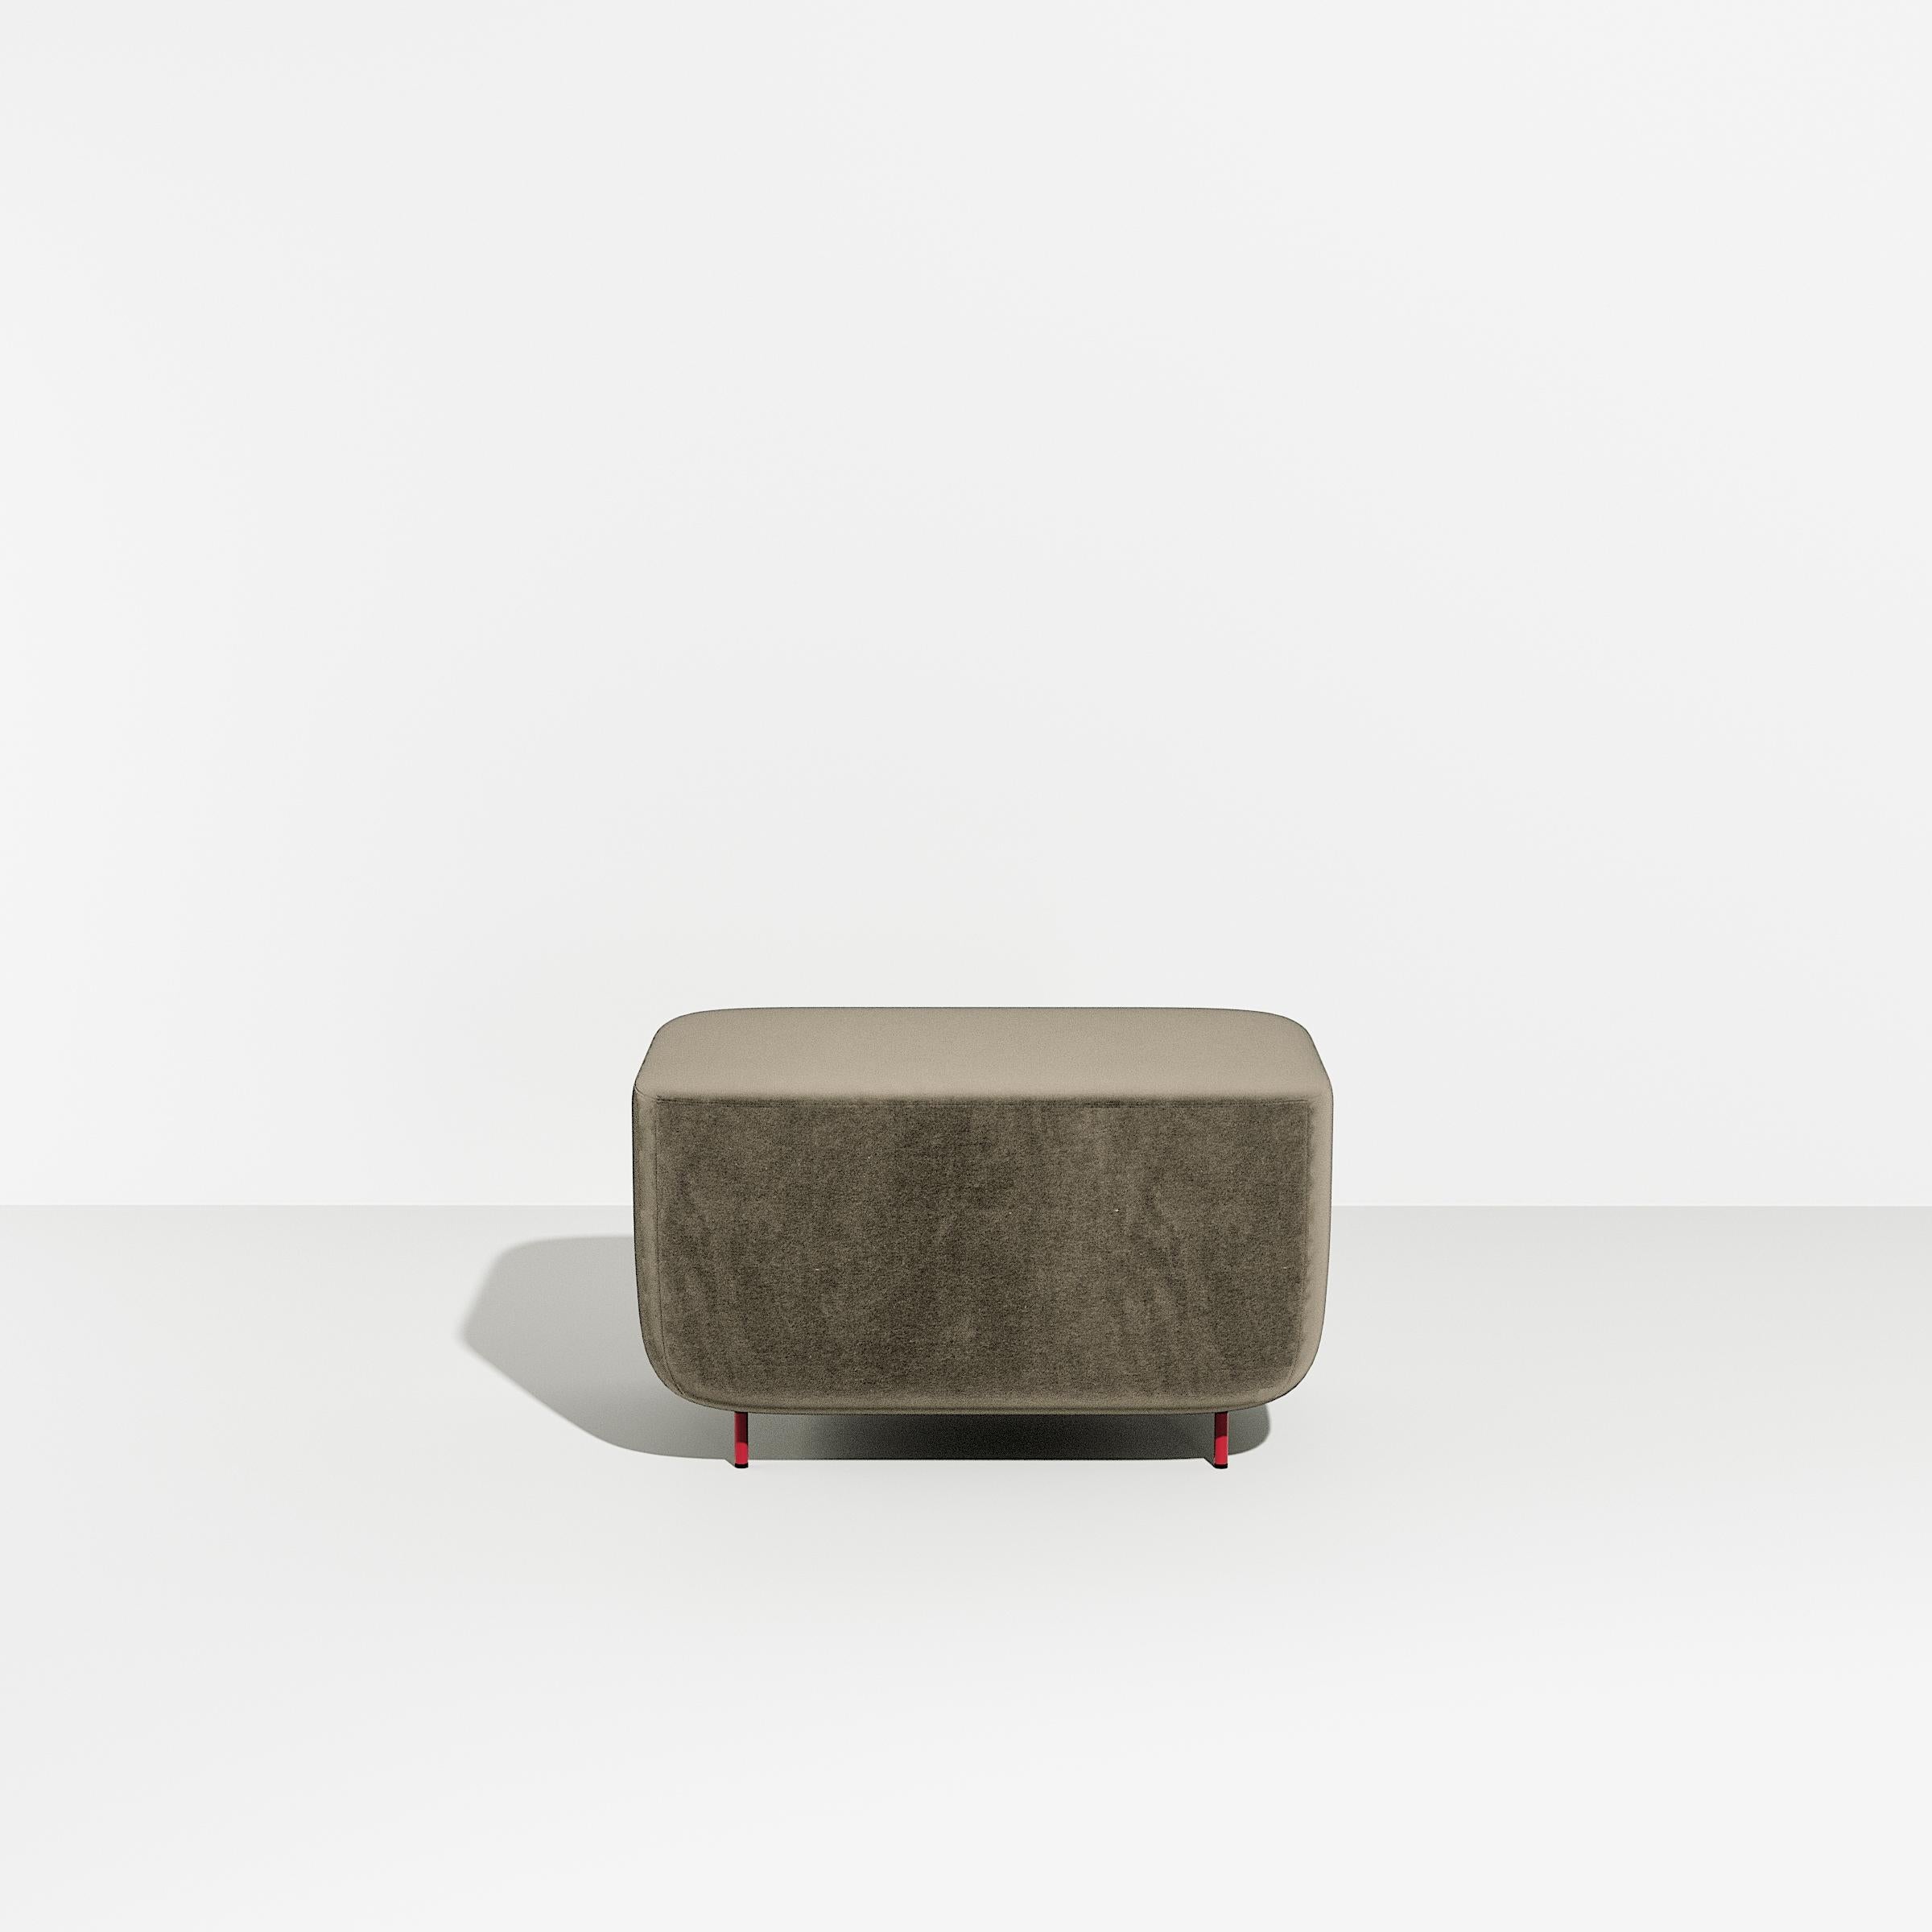 Petite Friture Small Hoff Stool in Grey-Beige by Morten & Jonas, 2015 In New Condition For Sale In Brooklyn, NY